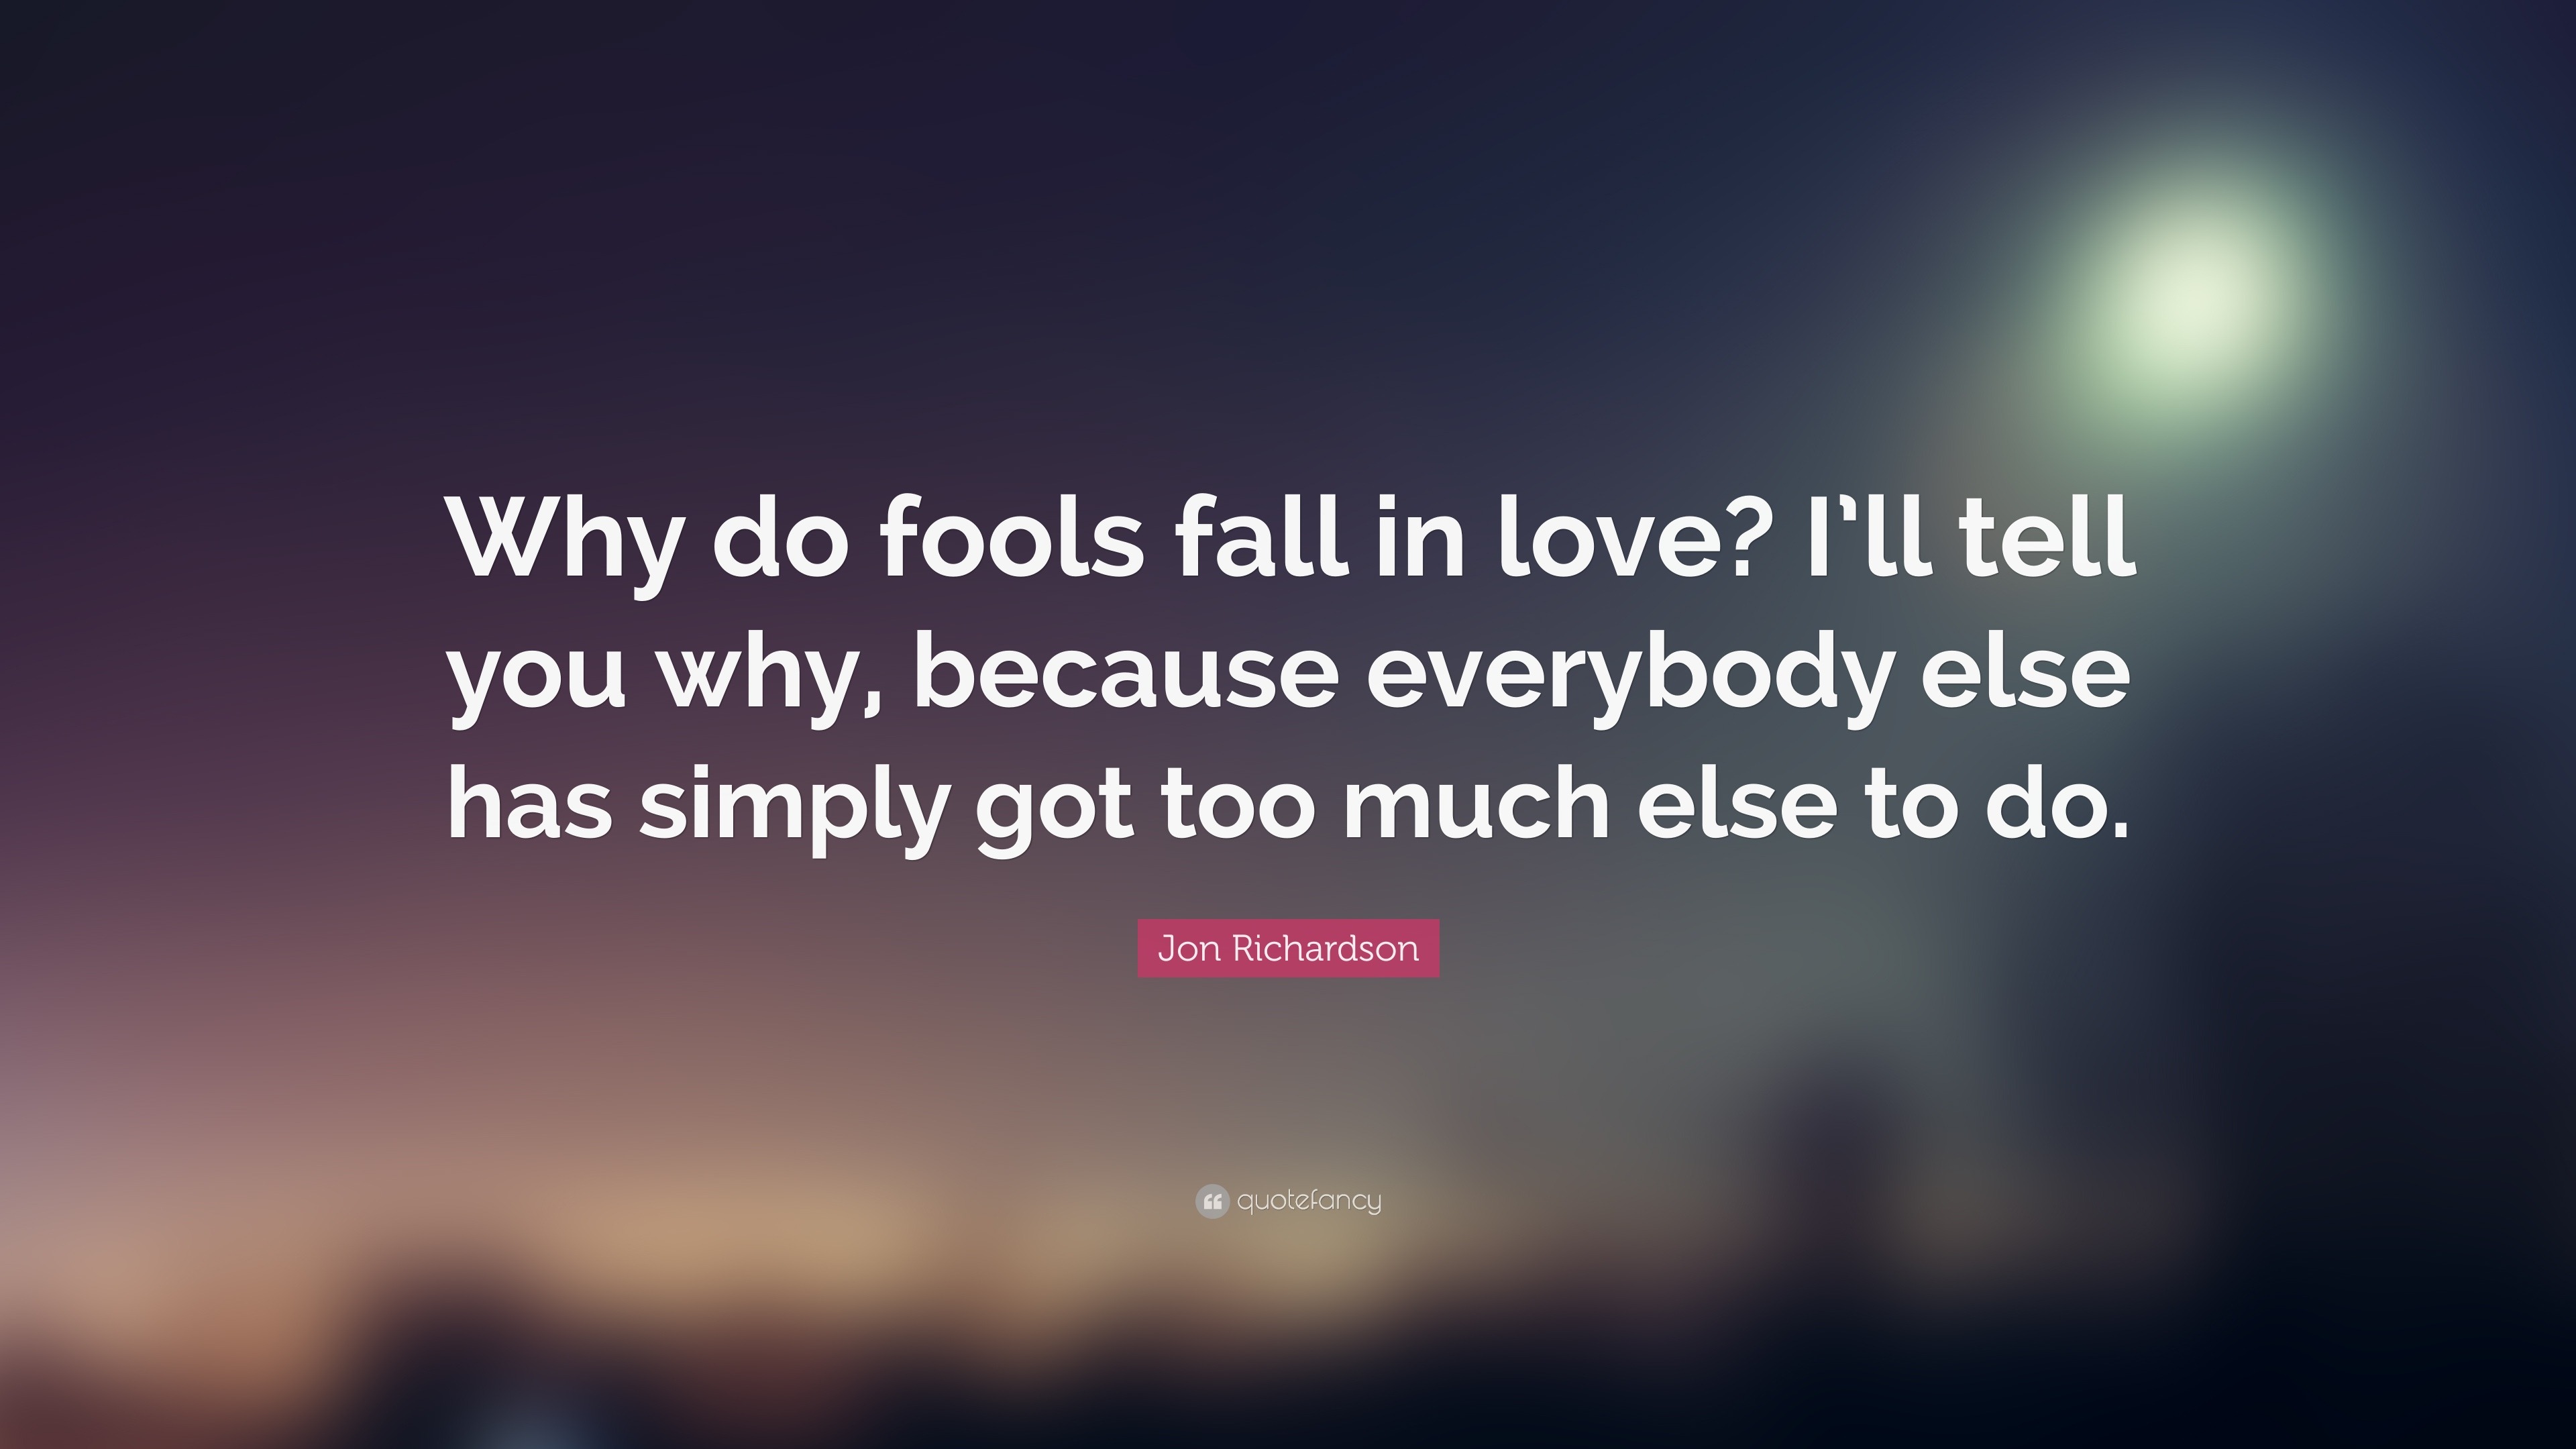 Jon Richardson Quote “Why do fools fall in love I ll tell